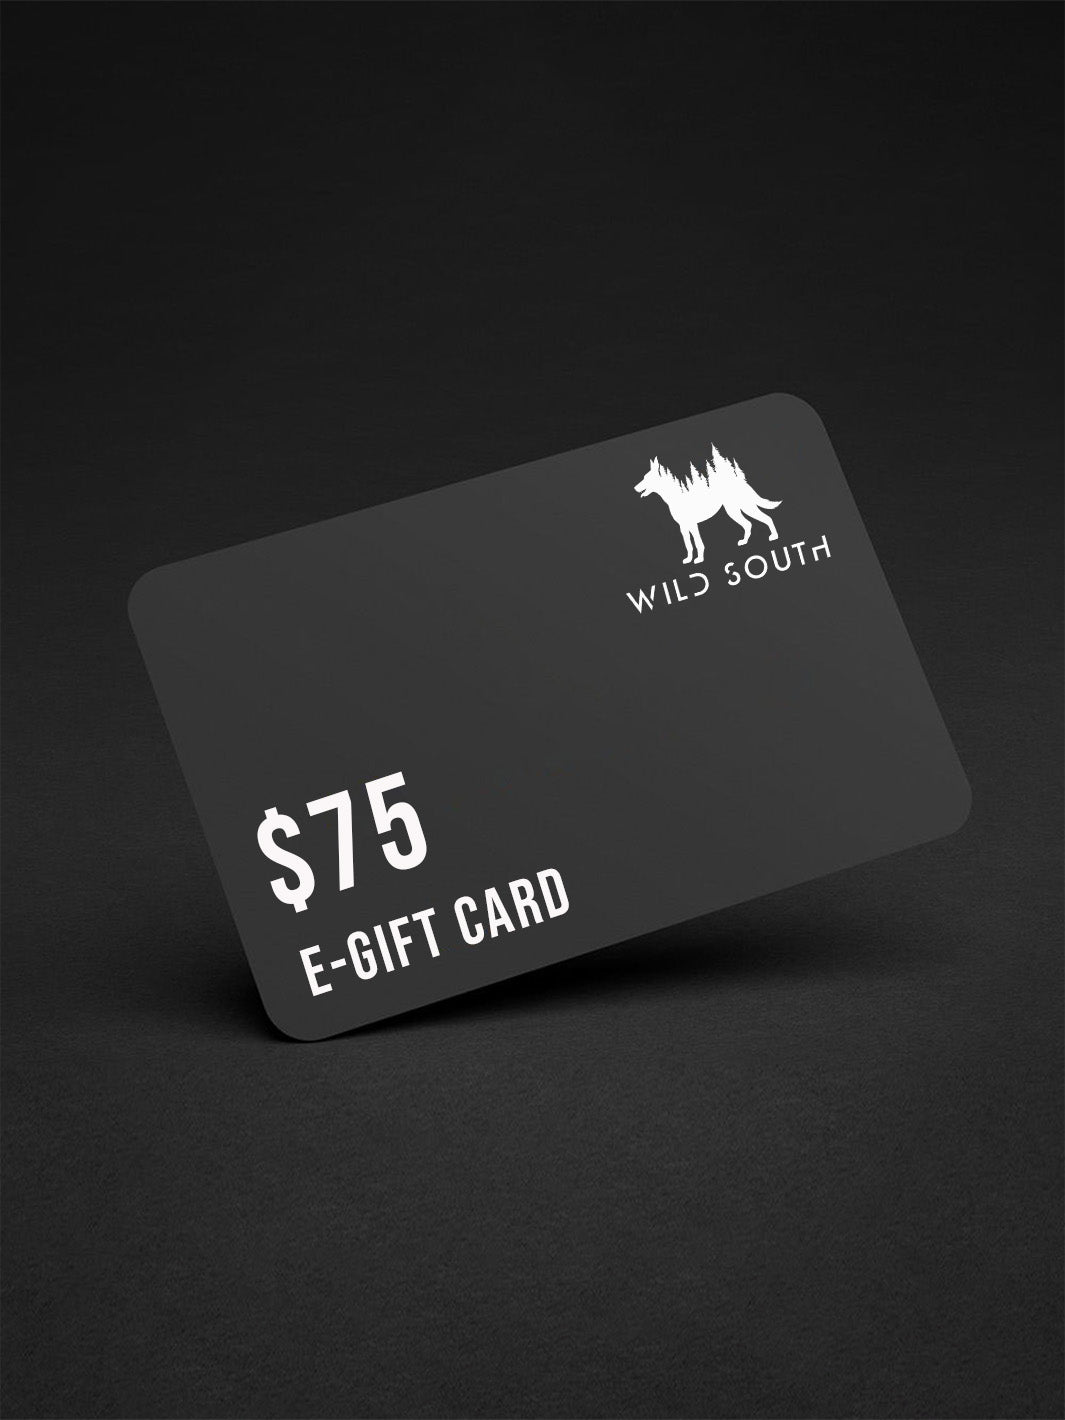 Wild South gift card